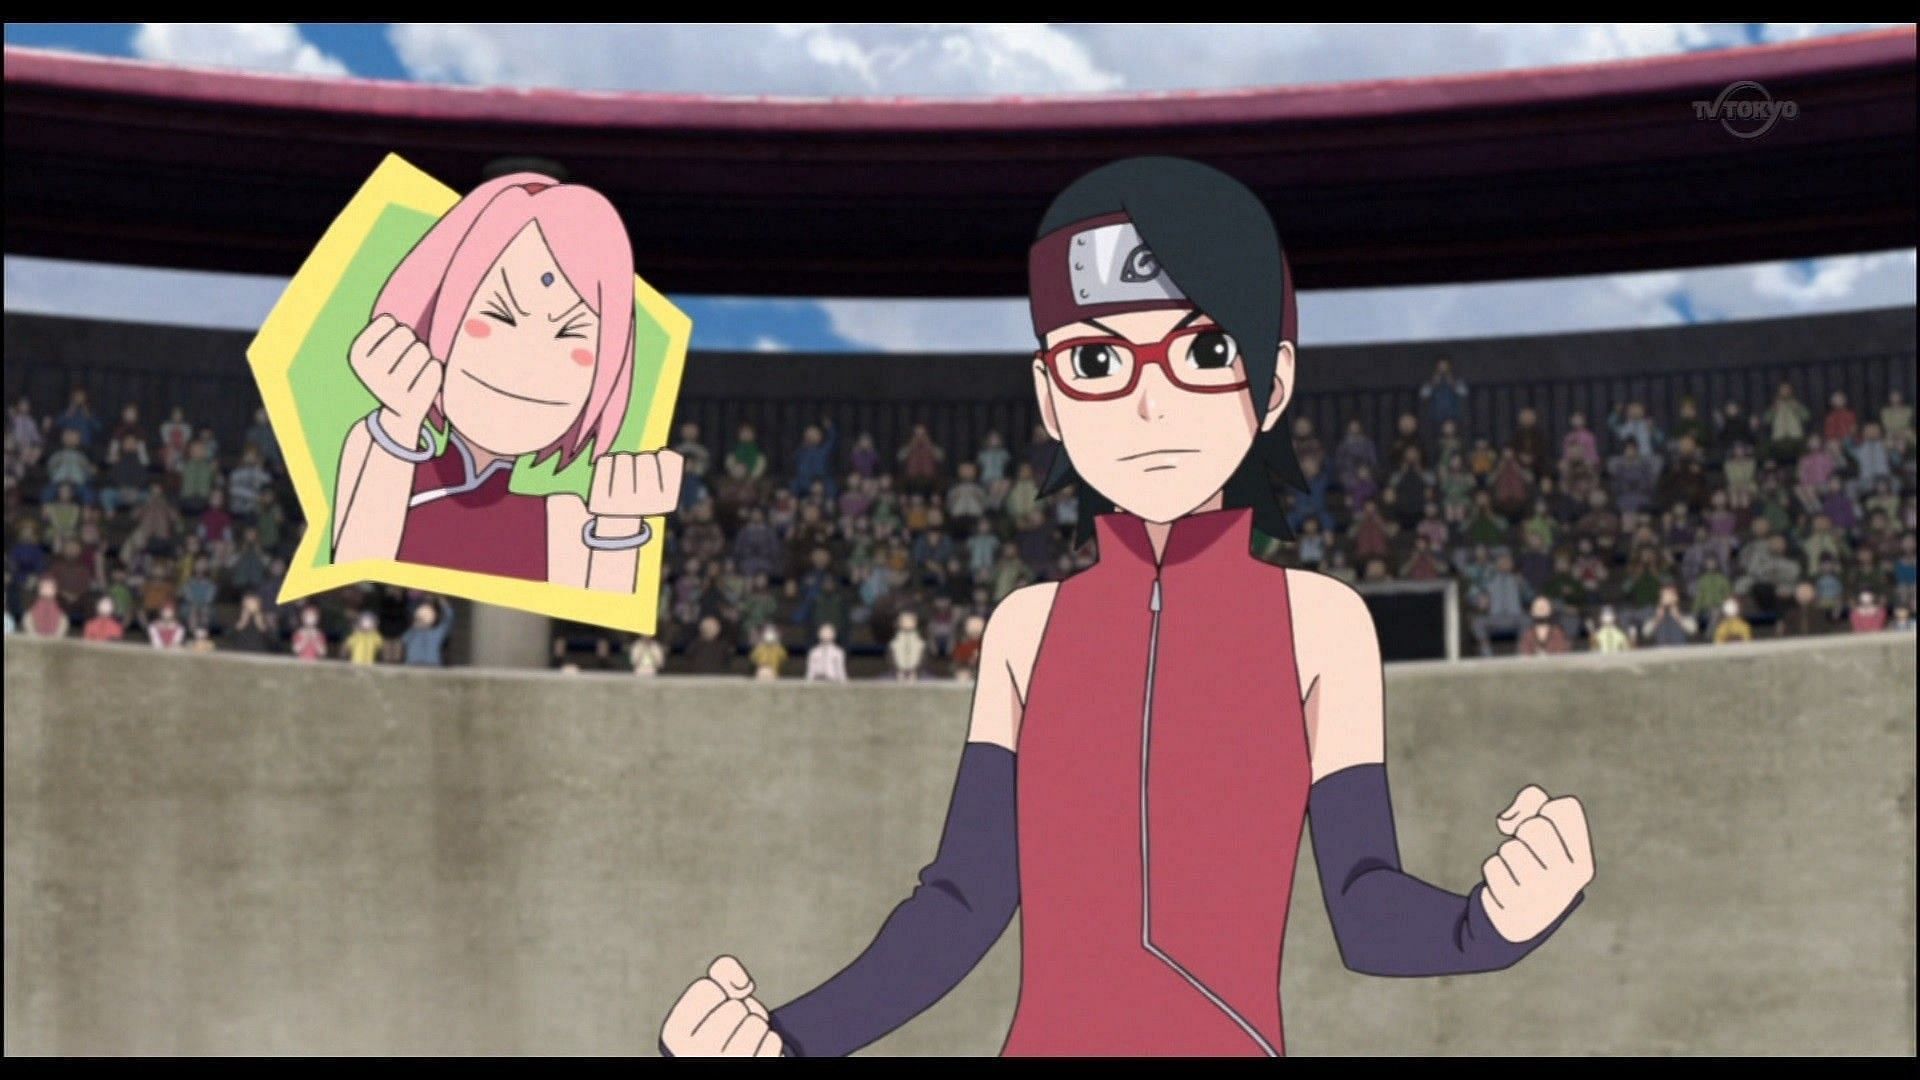 Jhastine Terante on X: Boruto Episode 128 was definitely worth watching!  This episode is giving me a NS vibe to it and I love it! The hype and  excitement was there! The